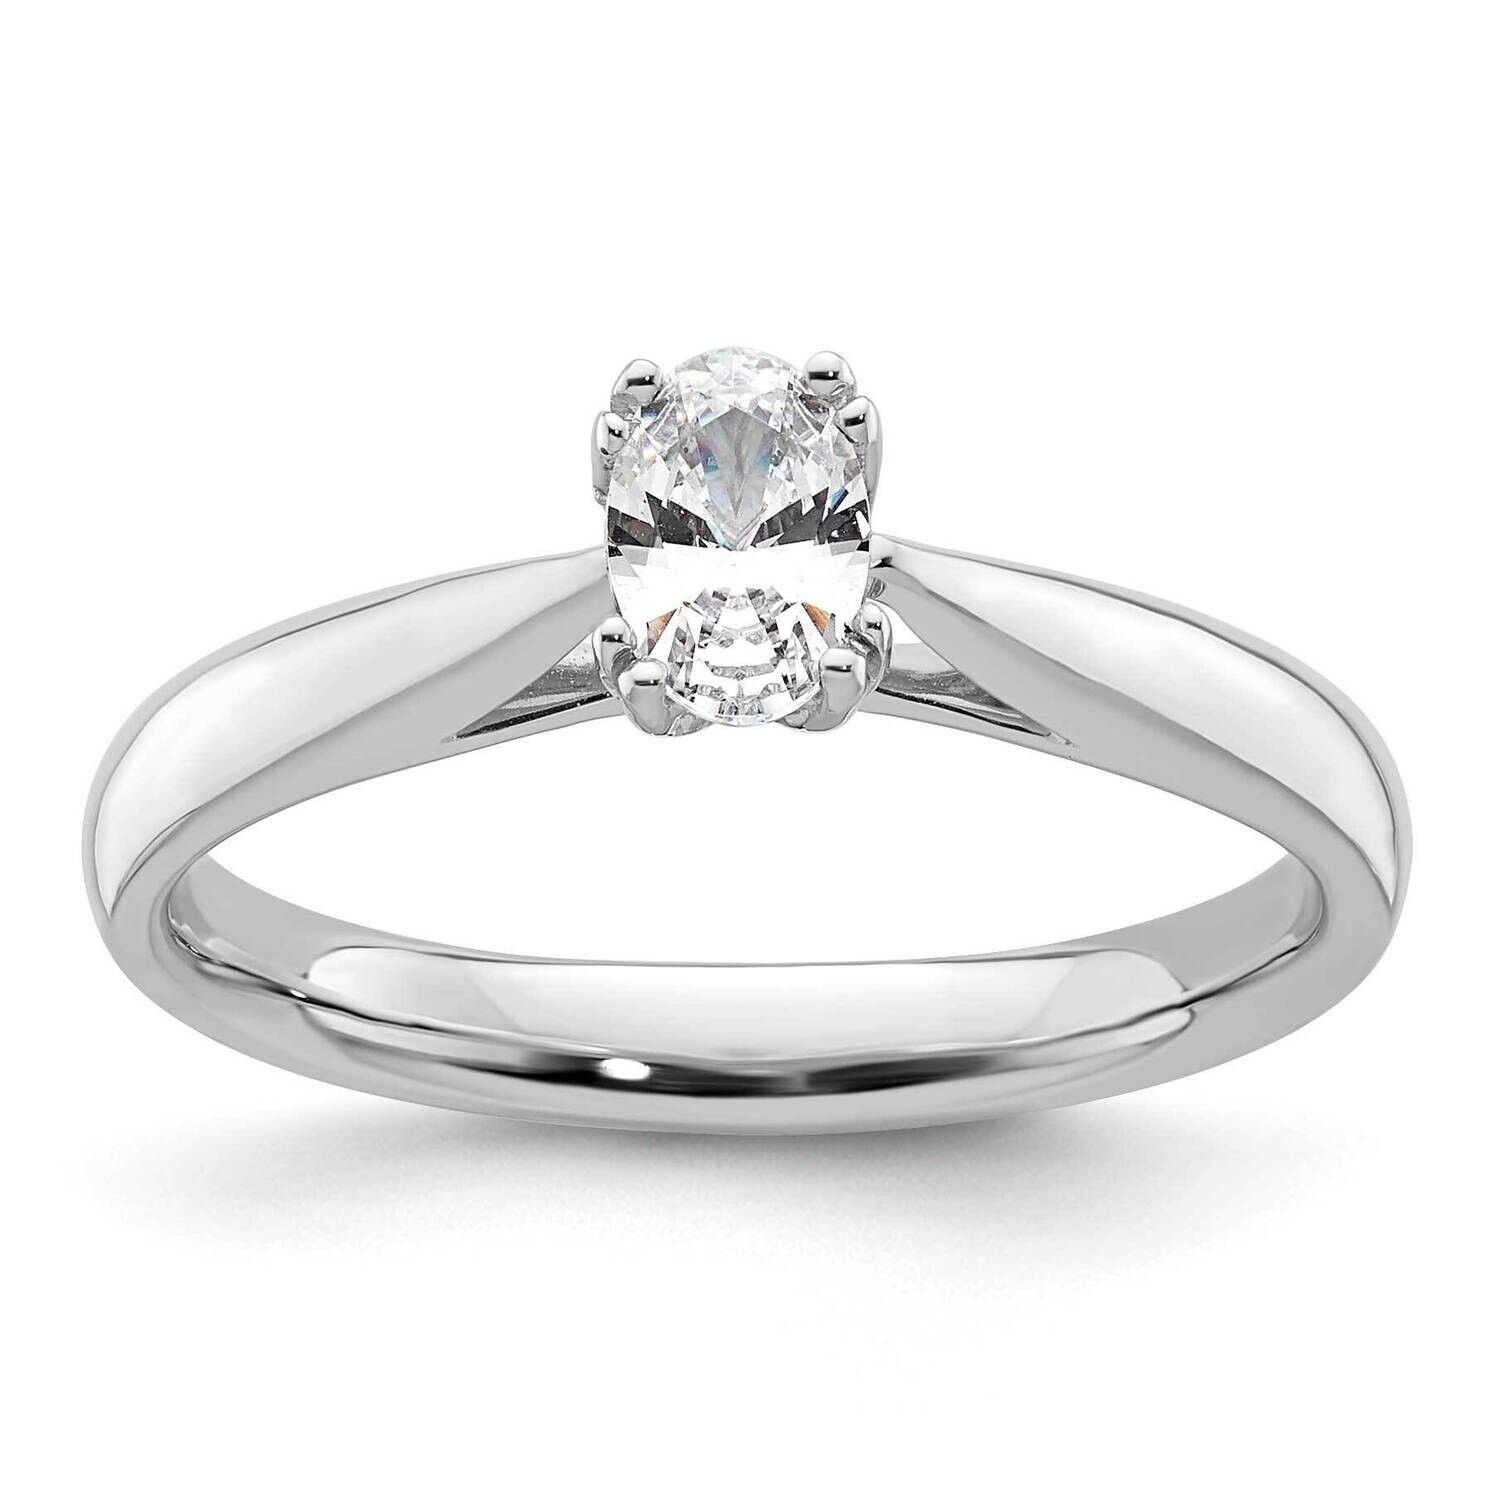 1/2 Carat 6X4mm 4-Prong Oval Solitaire Engagement Ring Mounting 14k White Gold RM1965E-050-CWAA